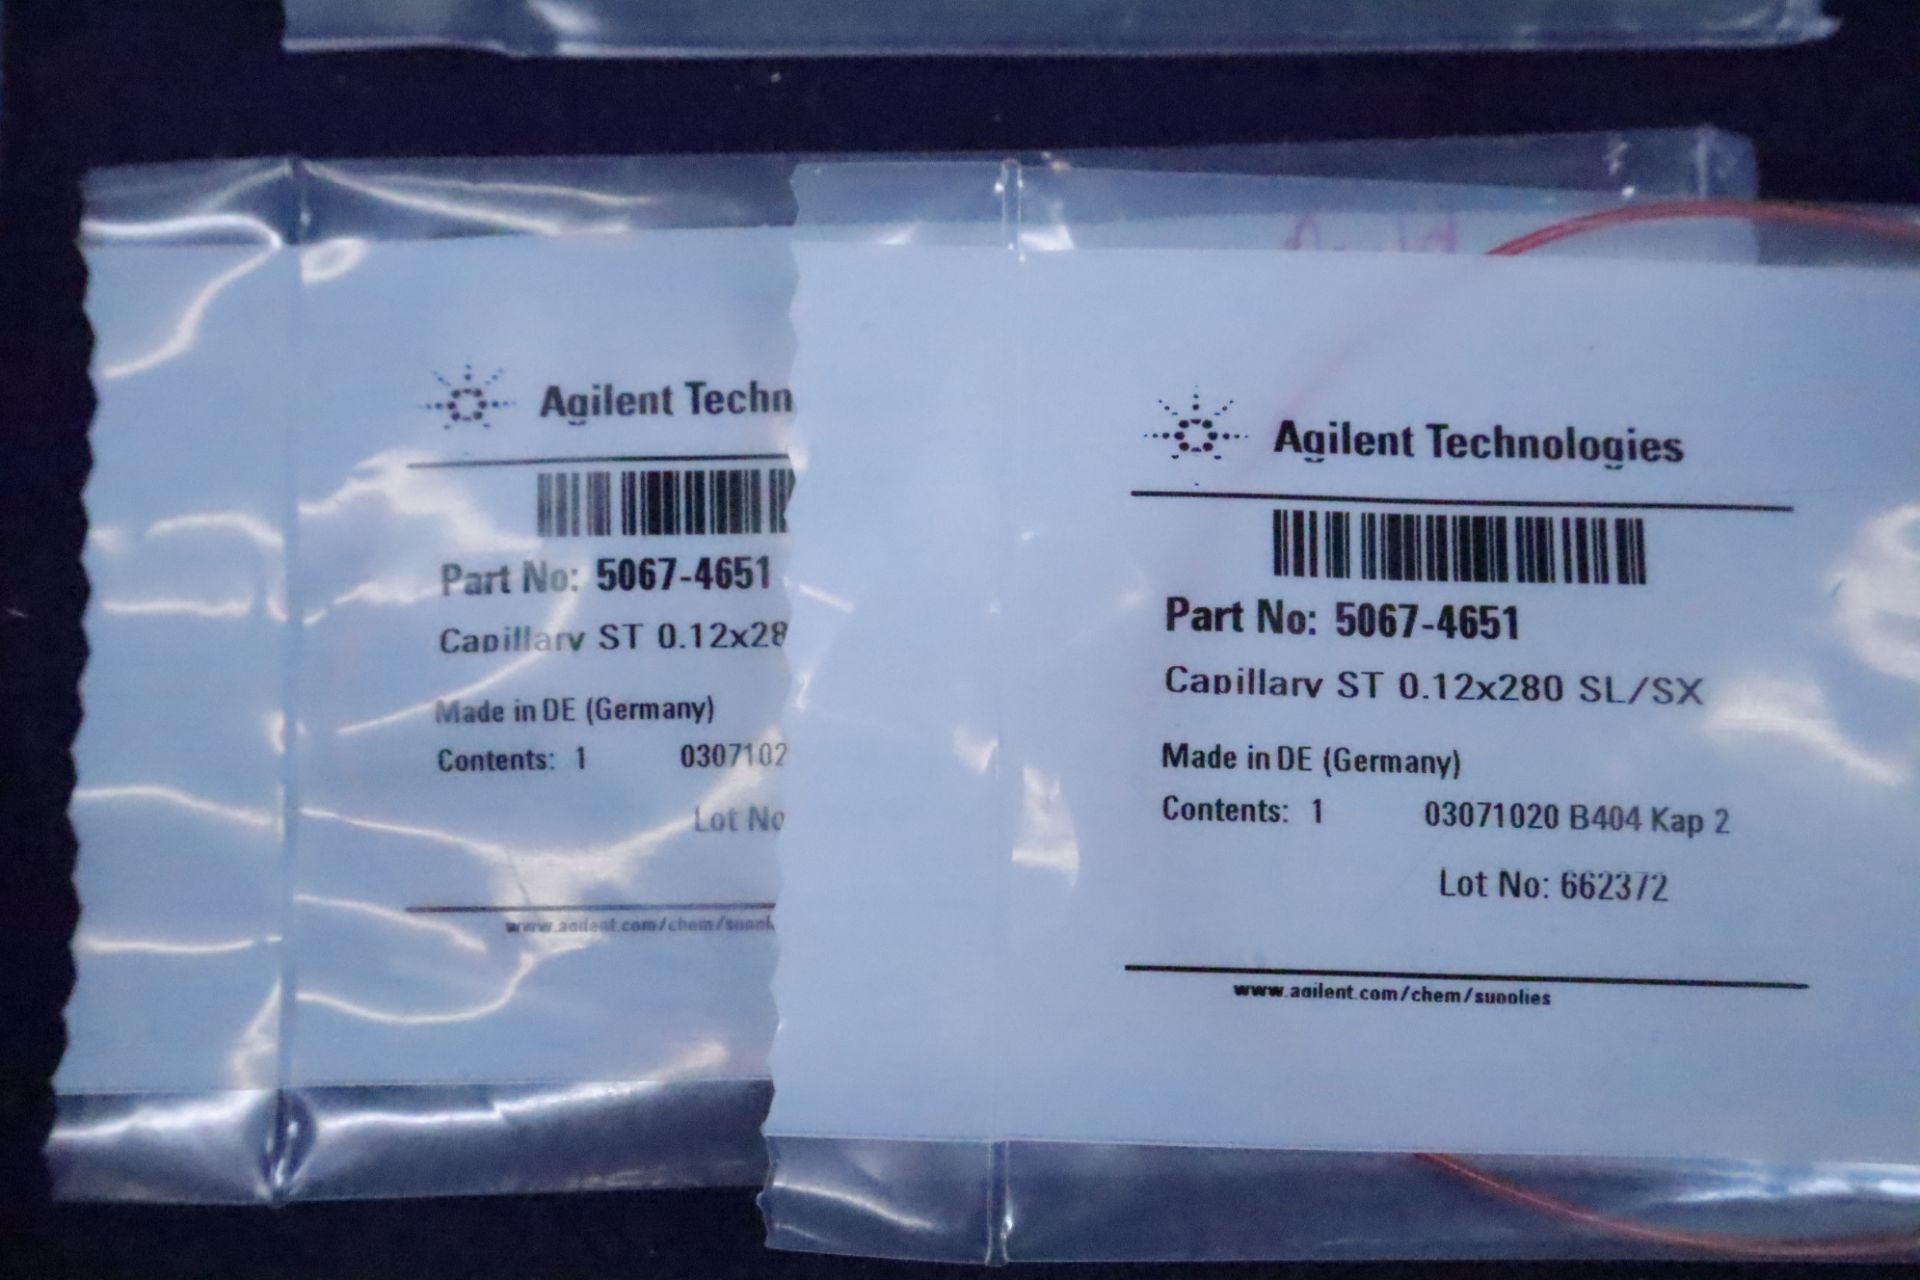 (NIB) Agilent Technologies OEM Replacement Parts for LC/MS Machines - Image 18 of 28